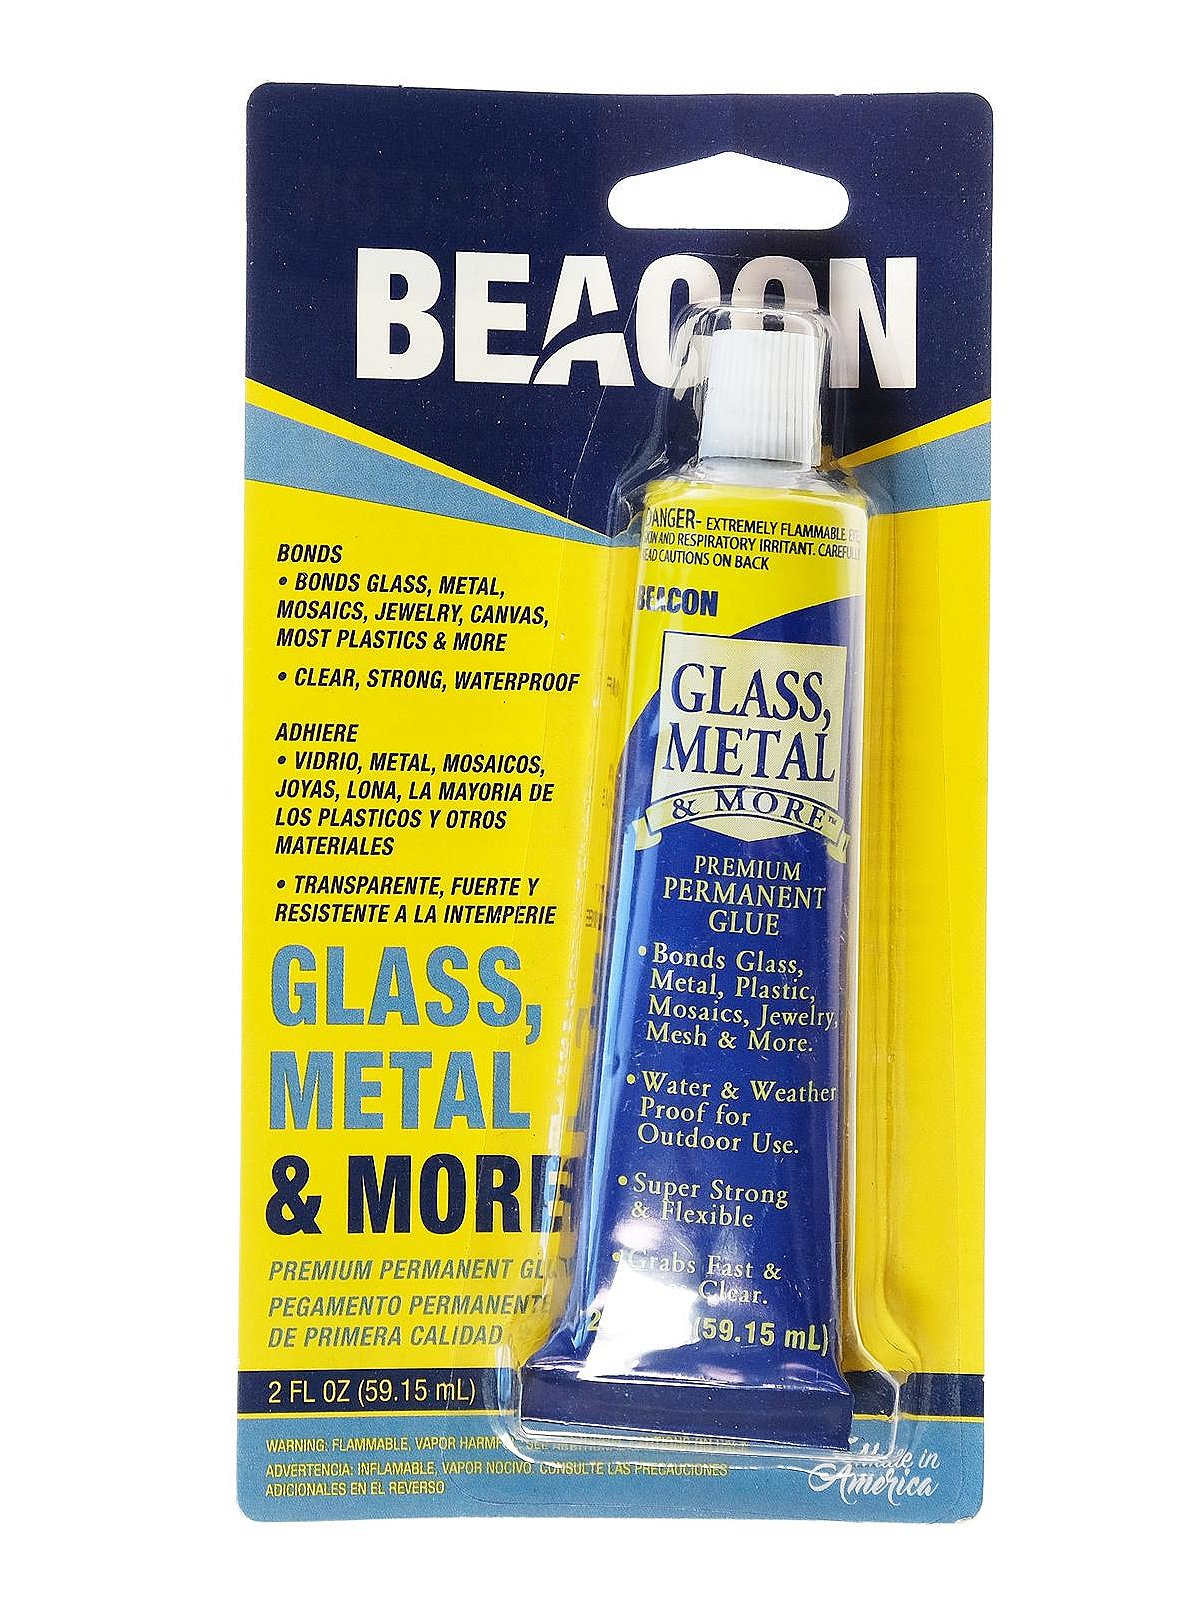 What is the the best outdoor glue for ceramics/glass/metal?